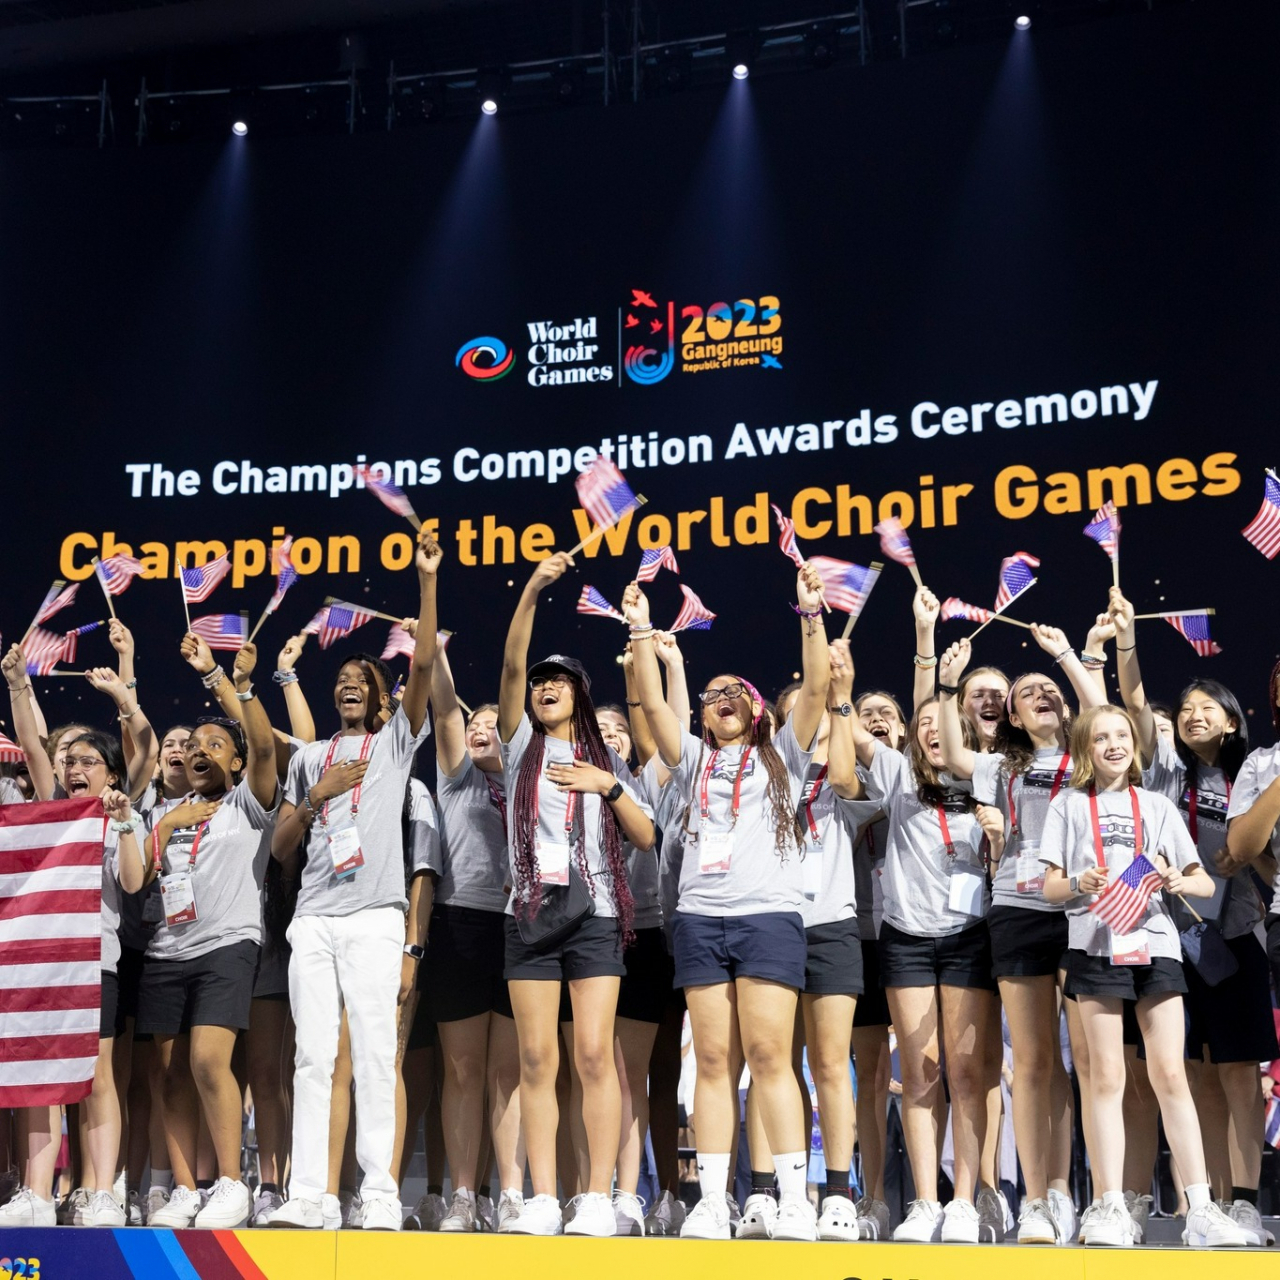 Members of the Young People’s Chorus of New York City celebrate during the awards ceremony at the 12th World Choir Games in Gangneung, Gangwon Province, July 13. (Interkultur)